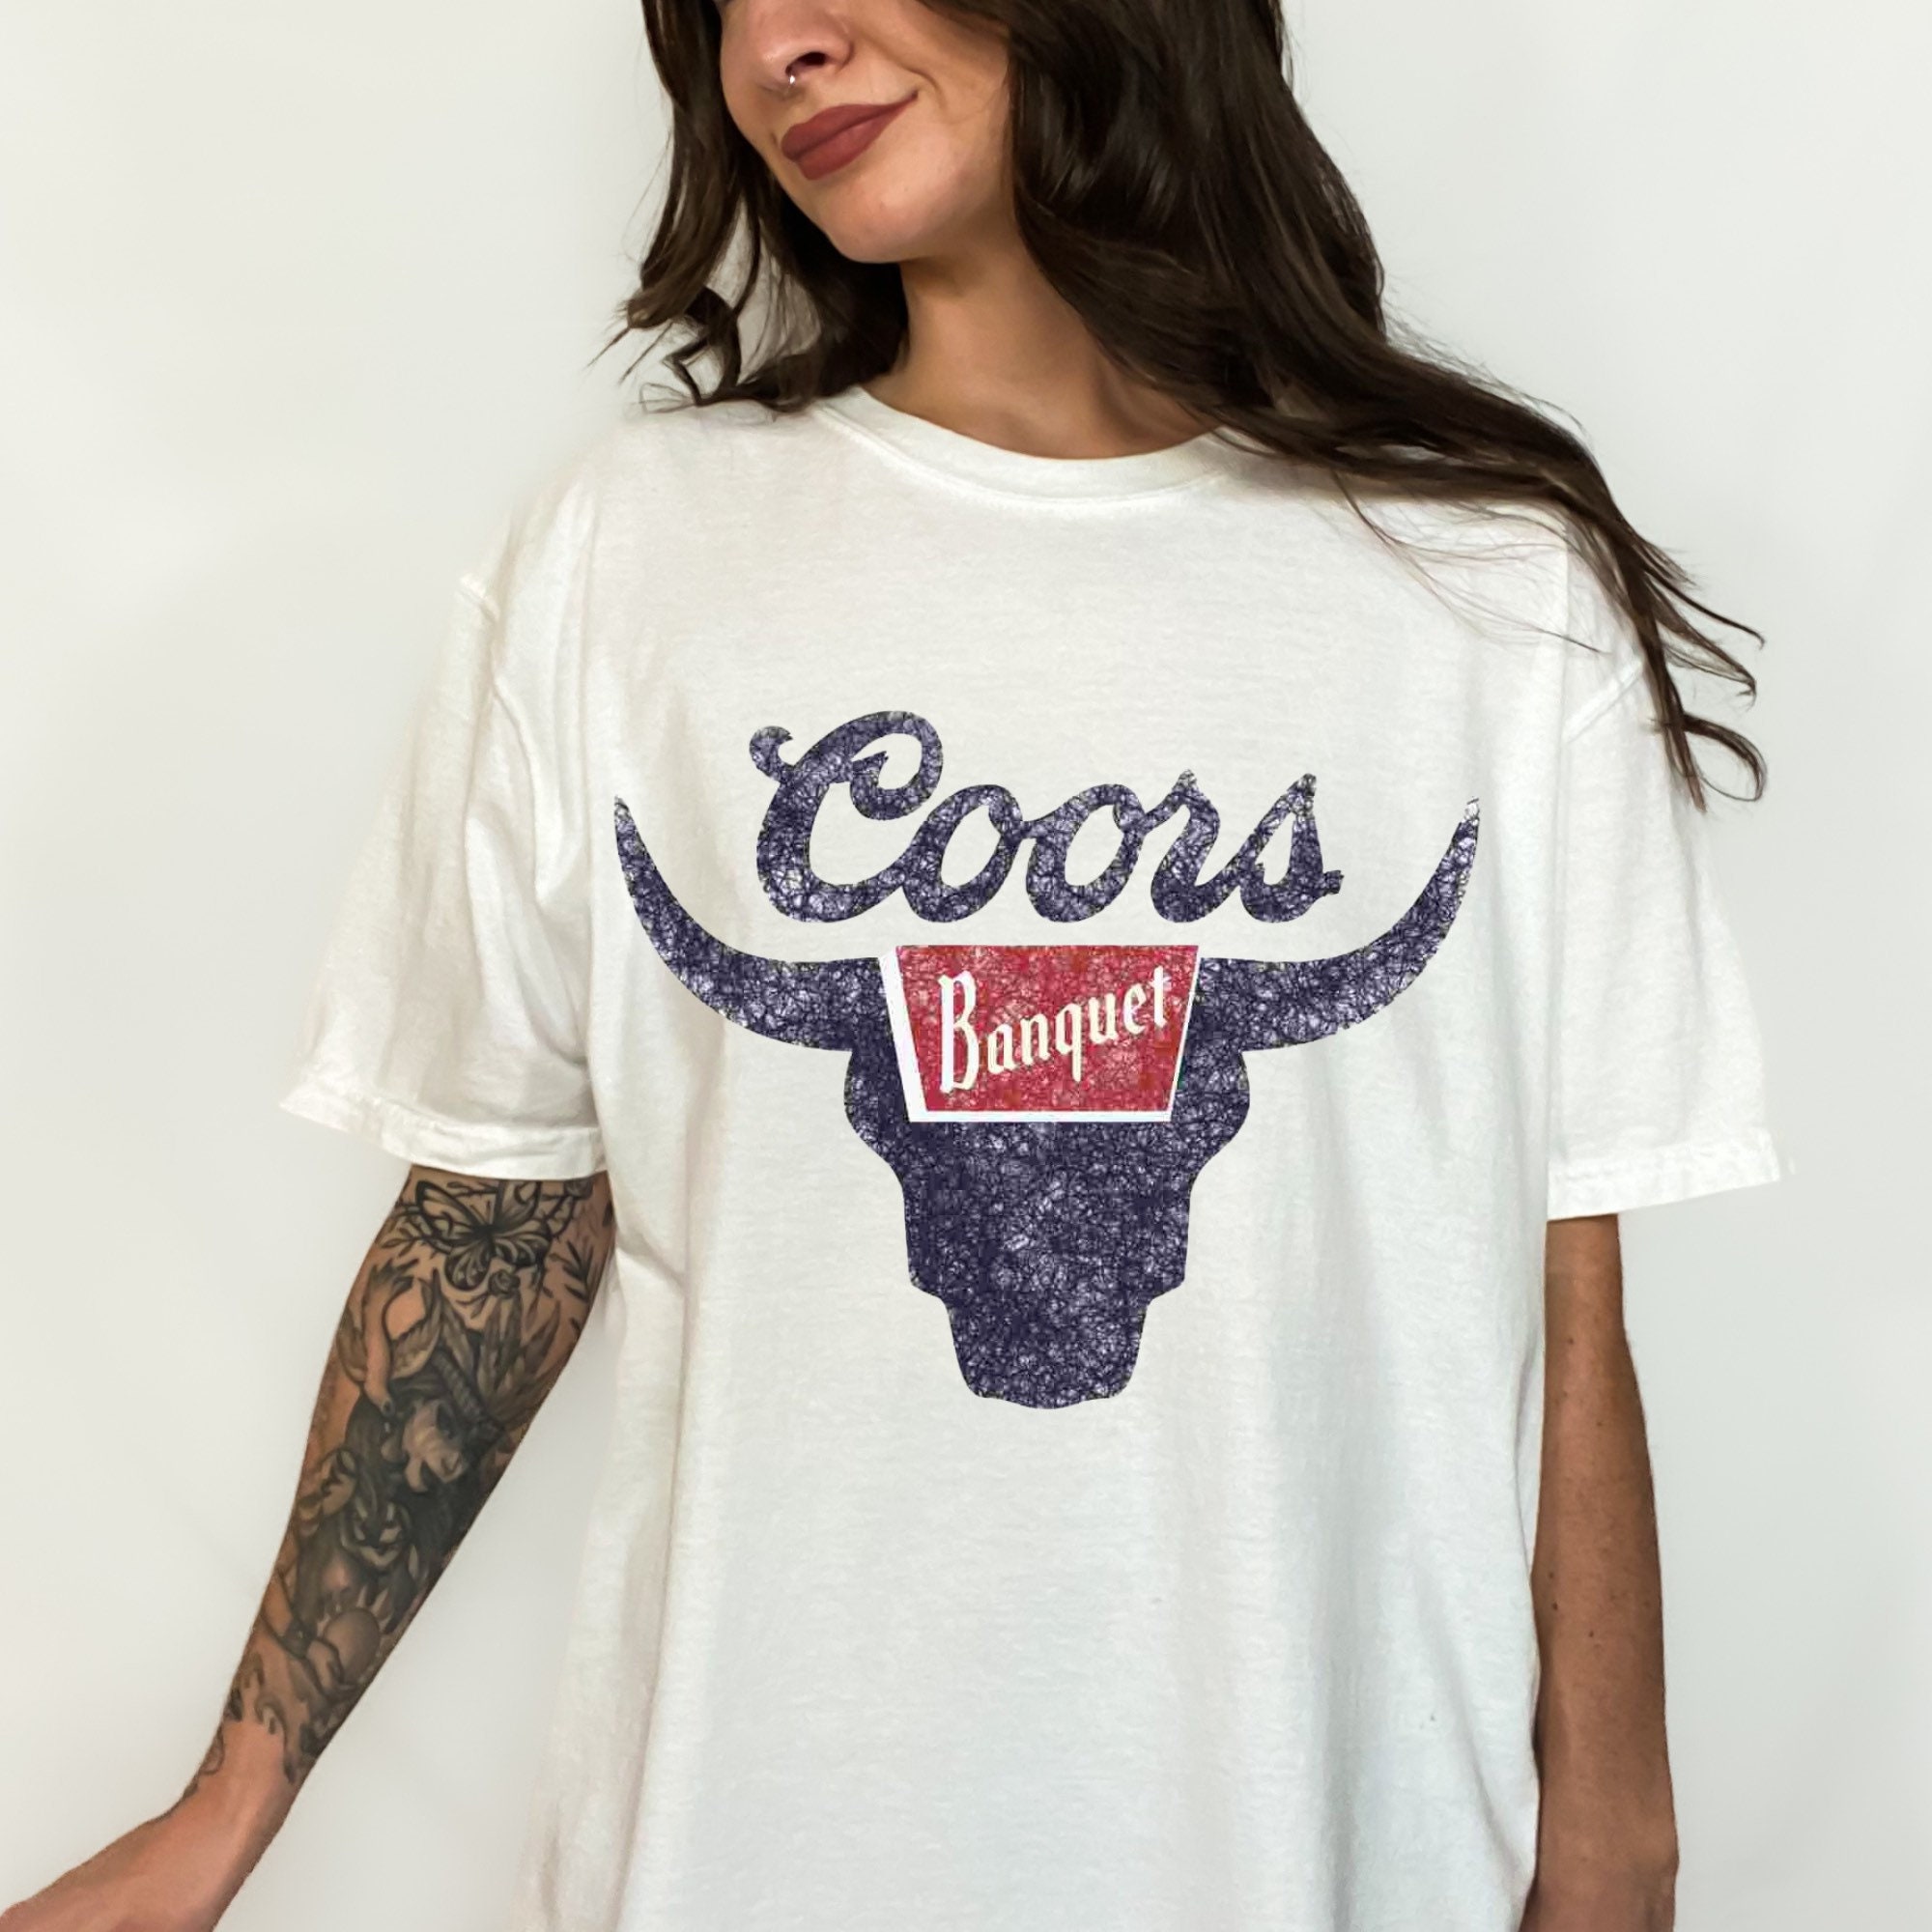 Coors banquet western country girl shirt